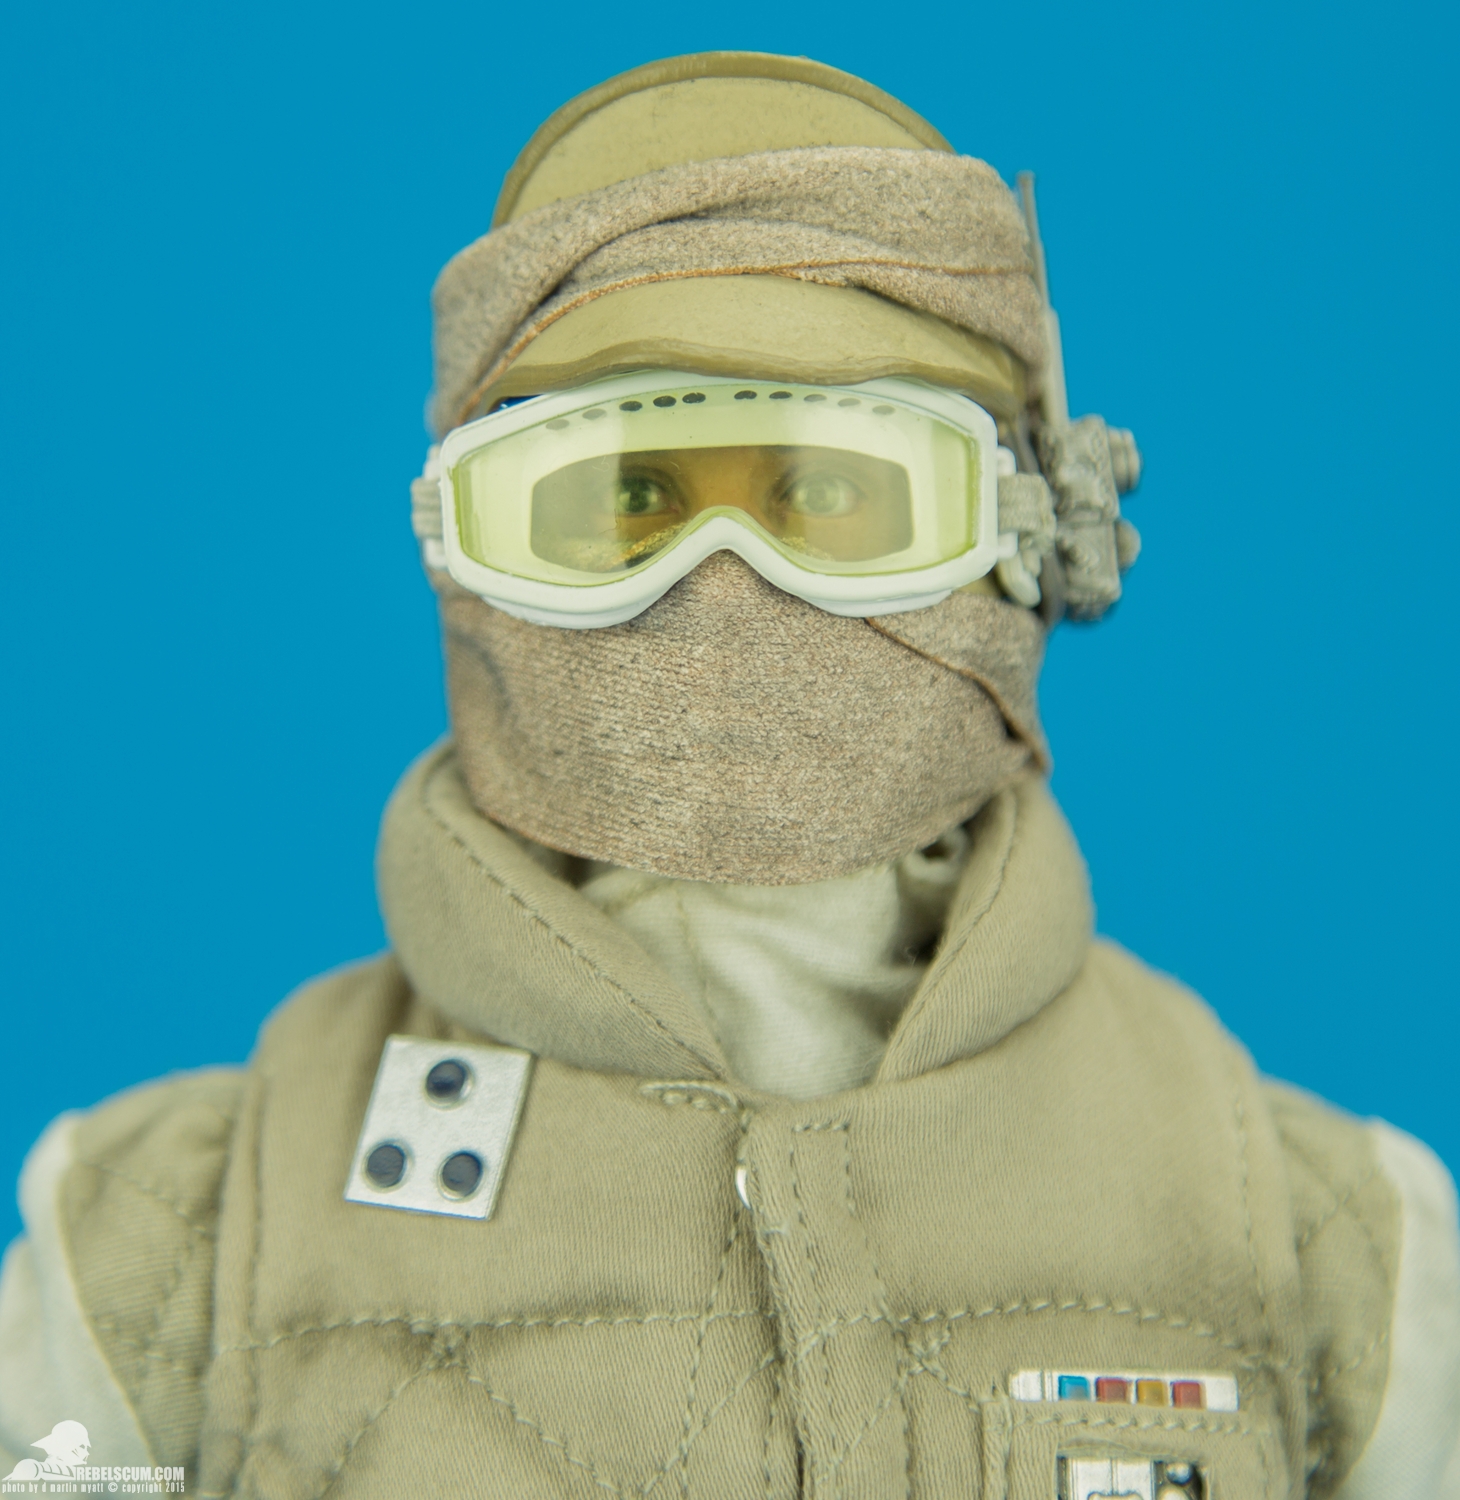 Luke-Skywalker-Hoth-Sixth-Scale-Sideshow-Collectibles-Star-Wars-026.jpg